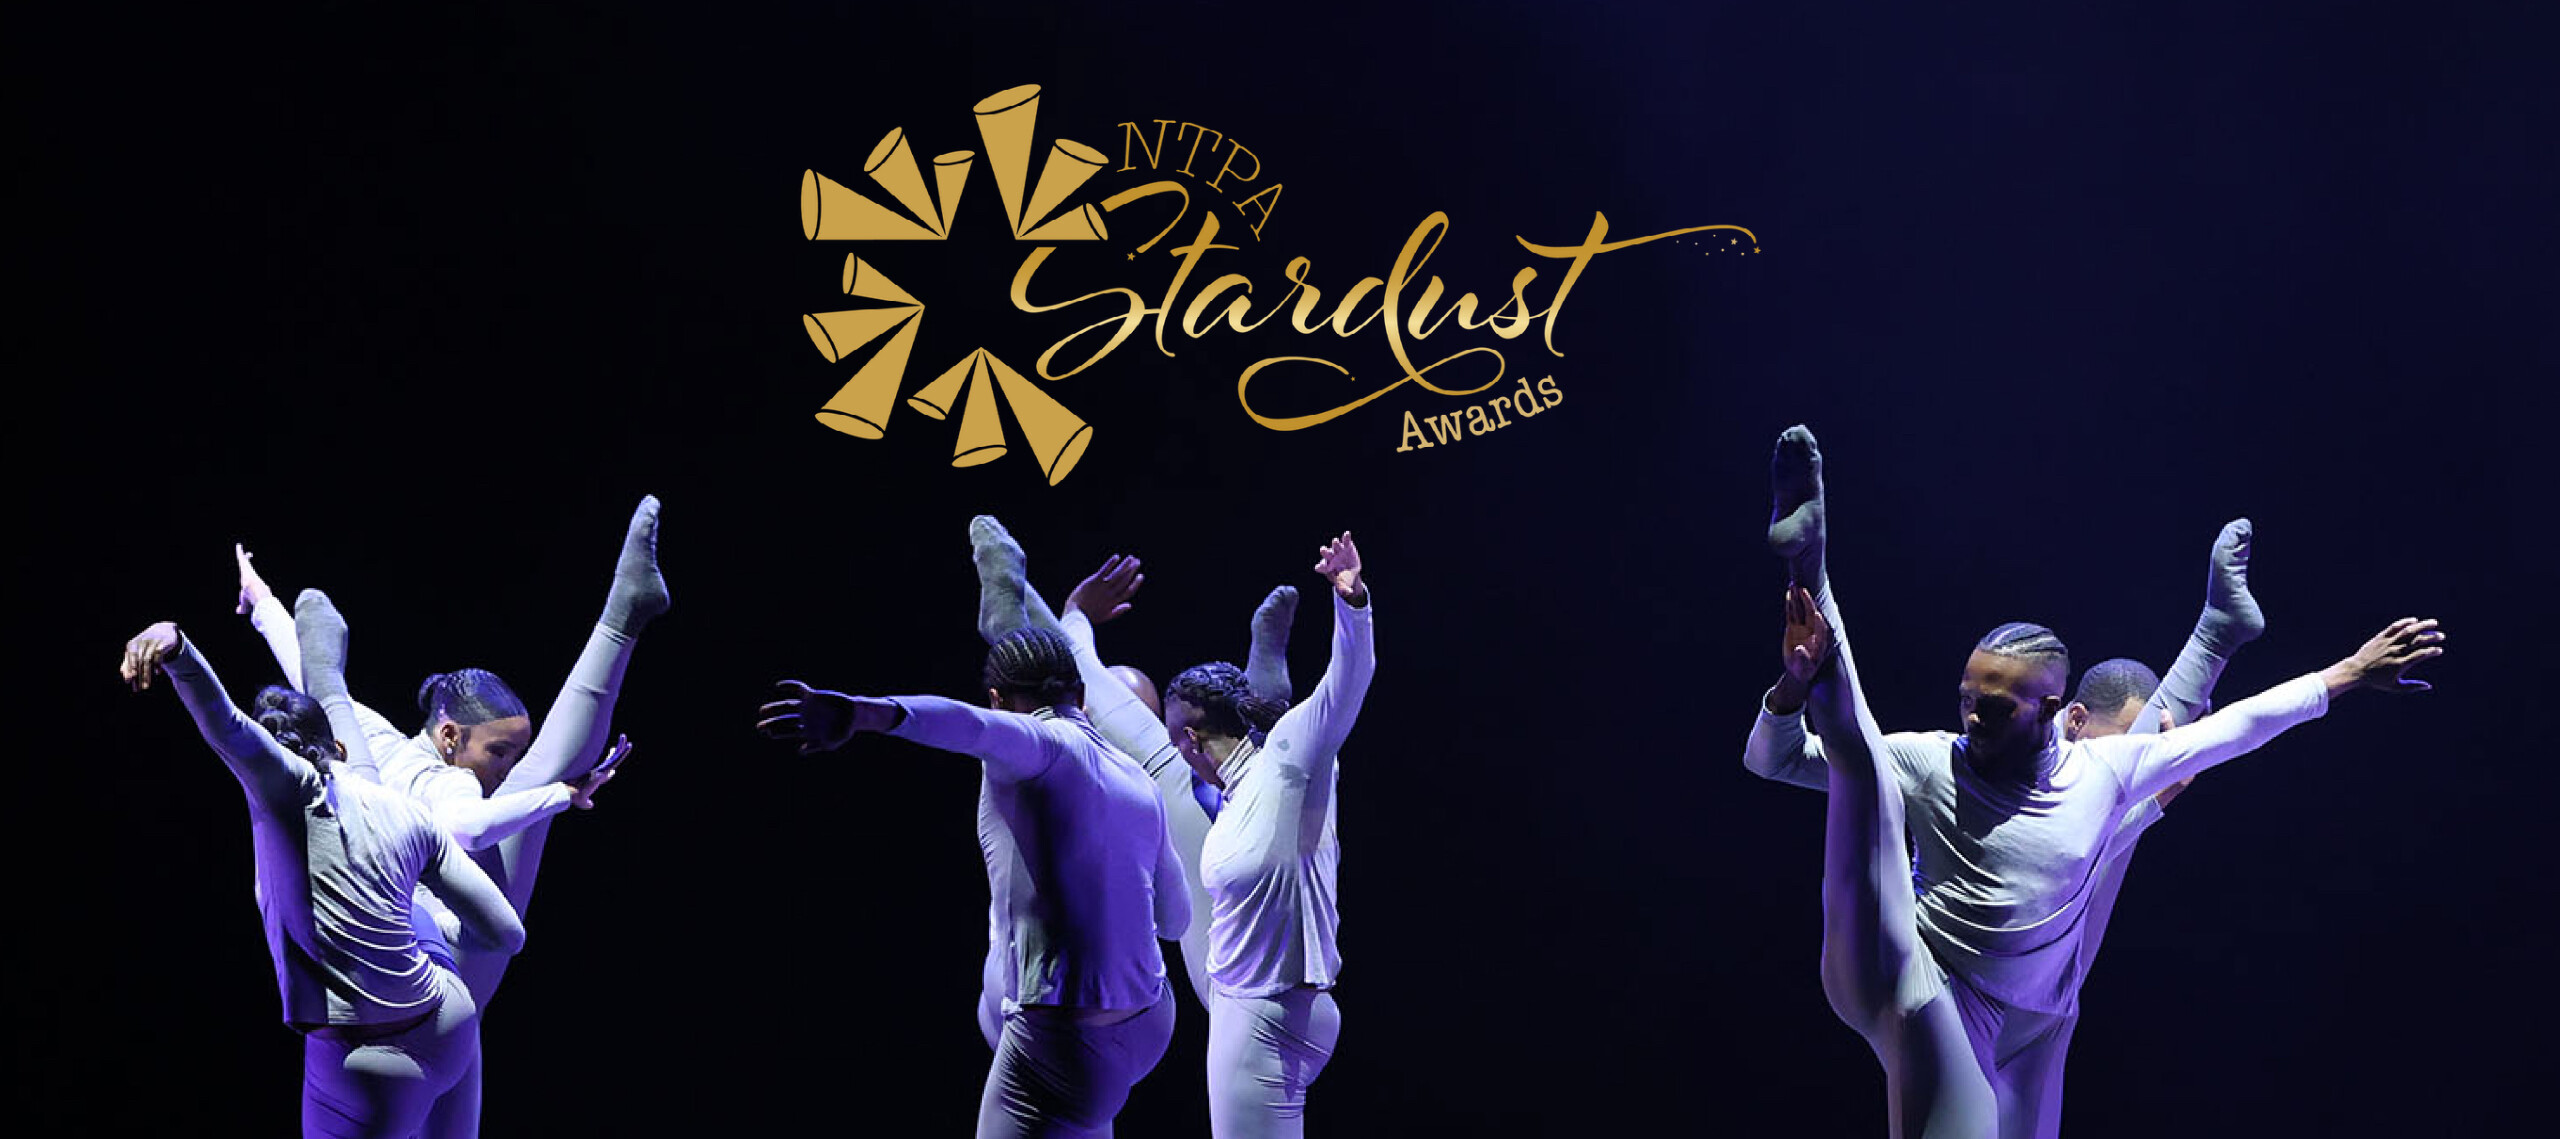 Dallas Black Dance Theatre performers in all white on a black background with NTPA Stardust Awards logo imposed on top